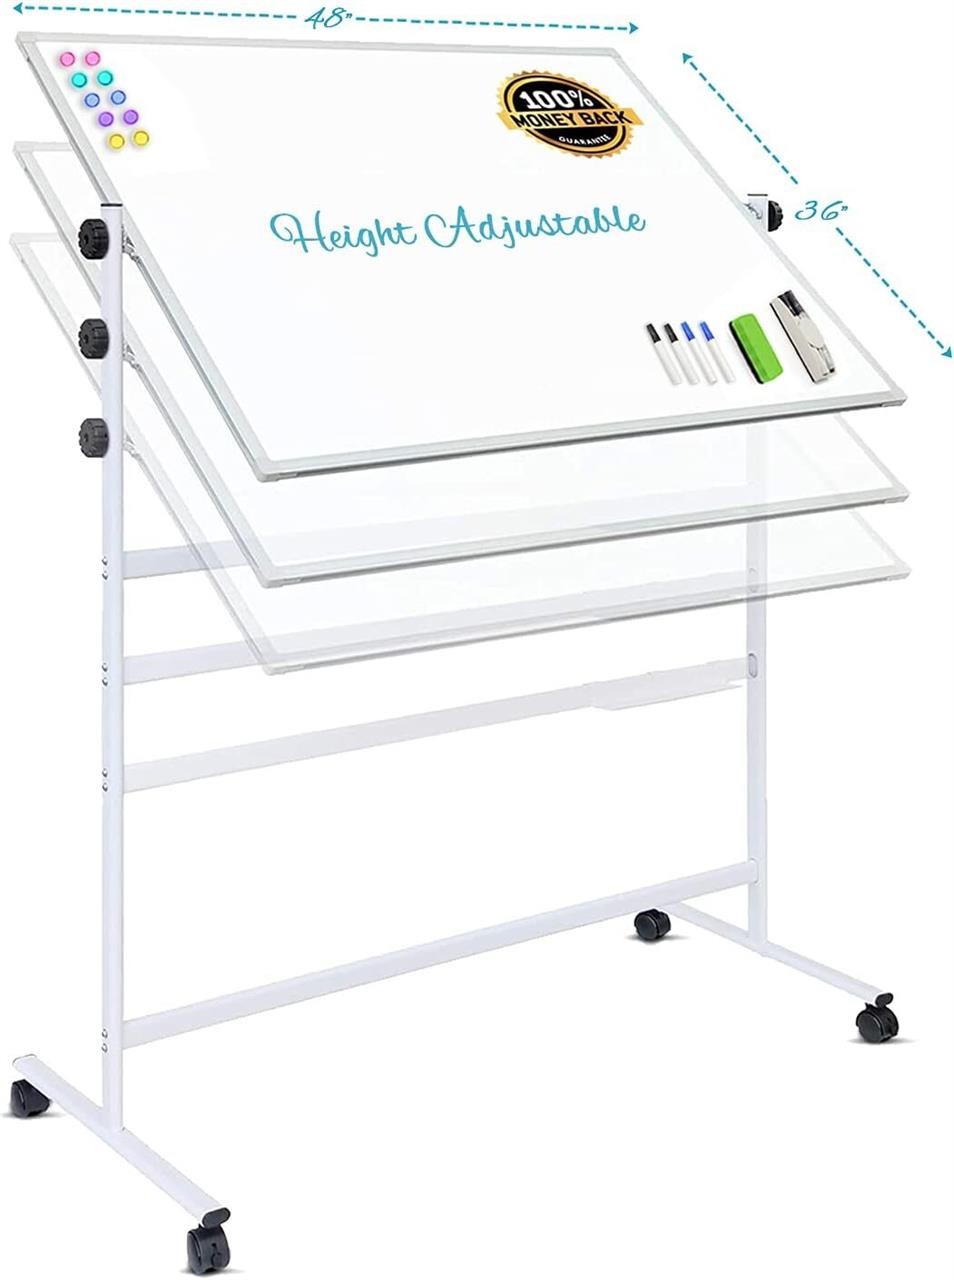 VISTECH 48x36 Mobile Whiteboard  Double Sided